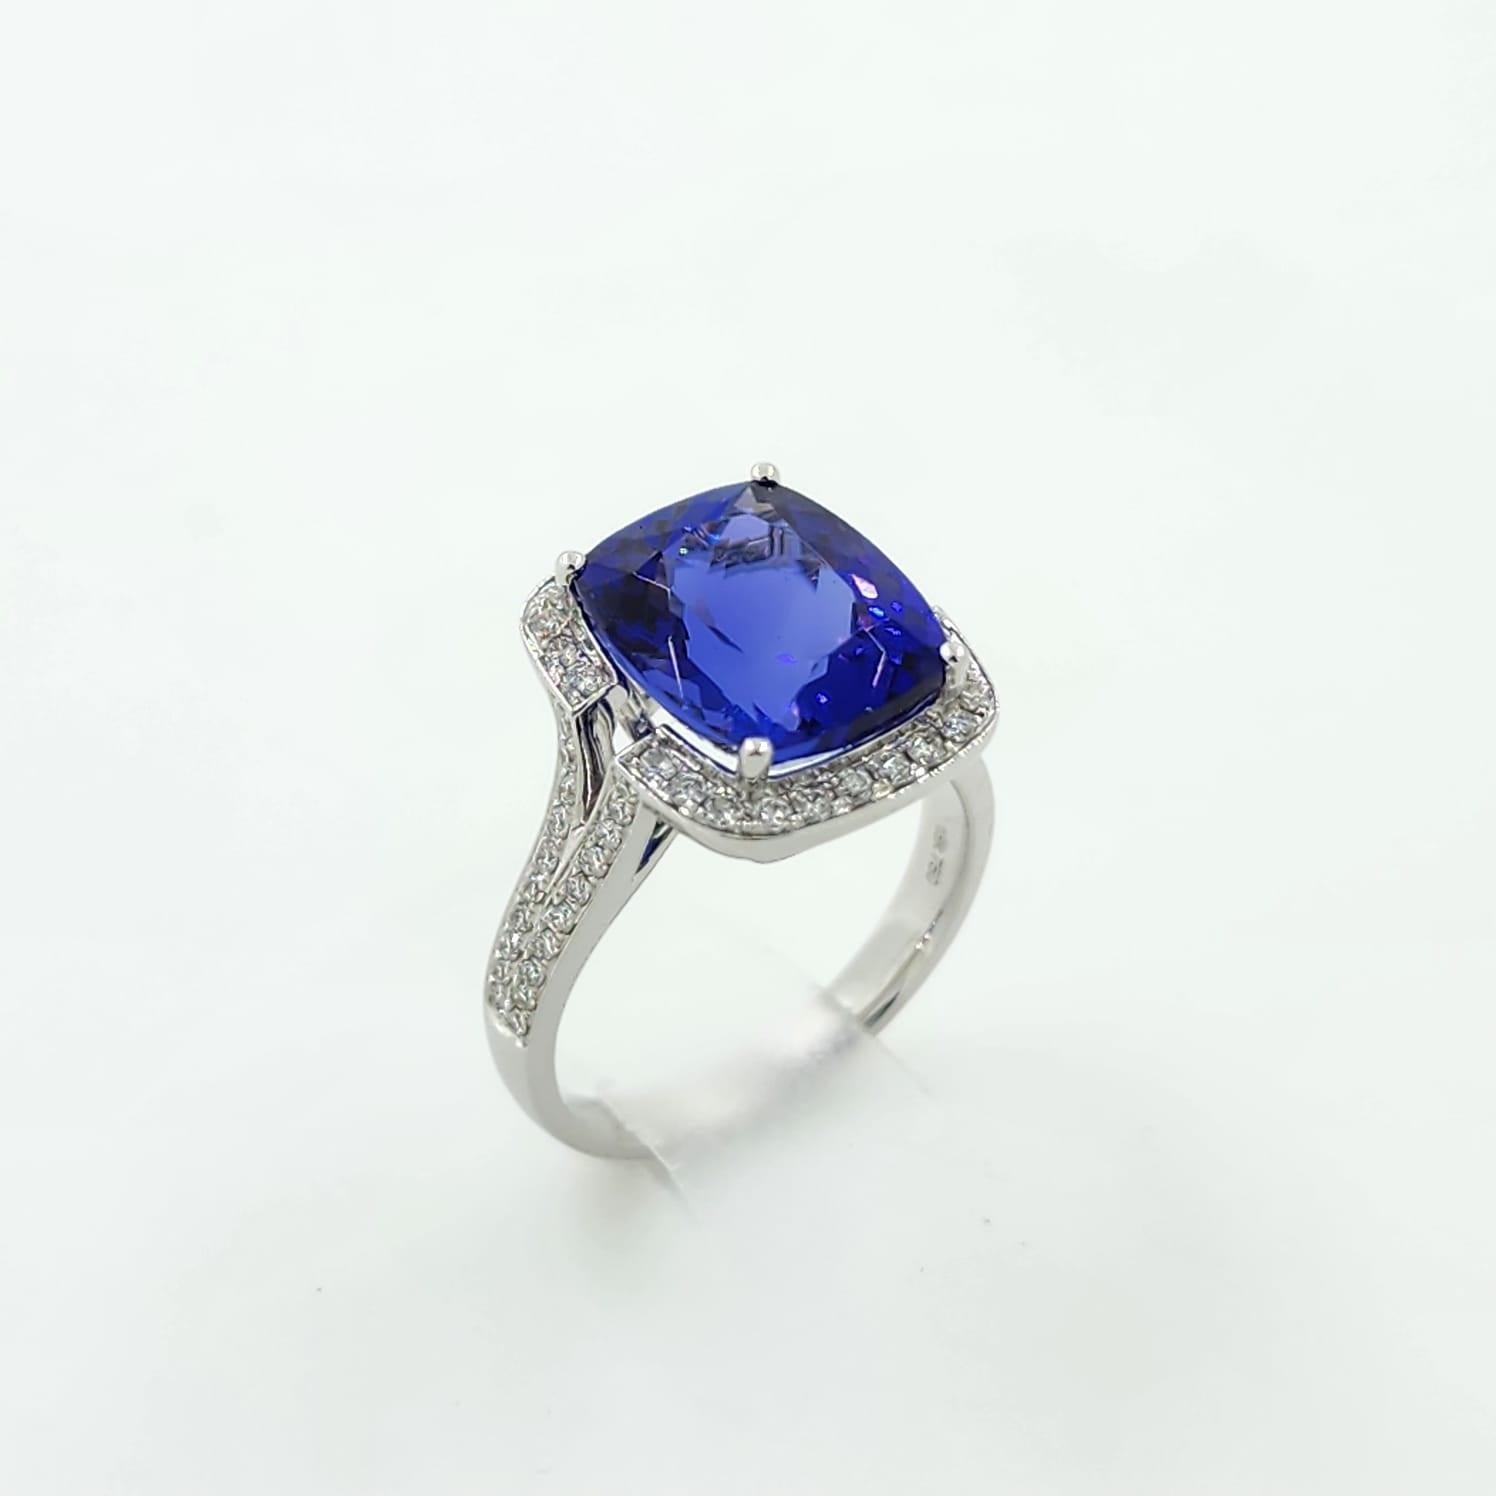 IGI Certified 6.08 Carat Tanzanite Diamond Cocktail Ring in 18K White Gold In New Condition For Sale In Hong Kong, HK